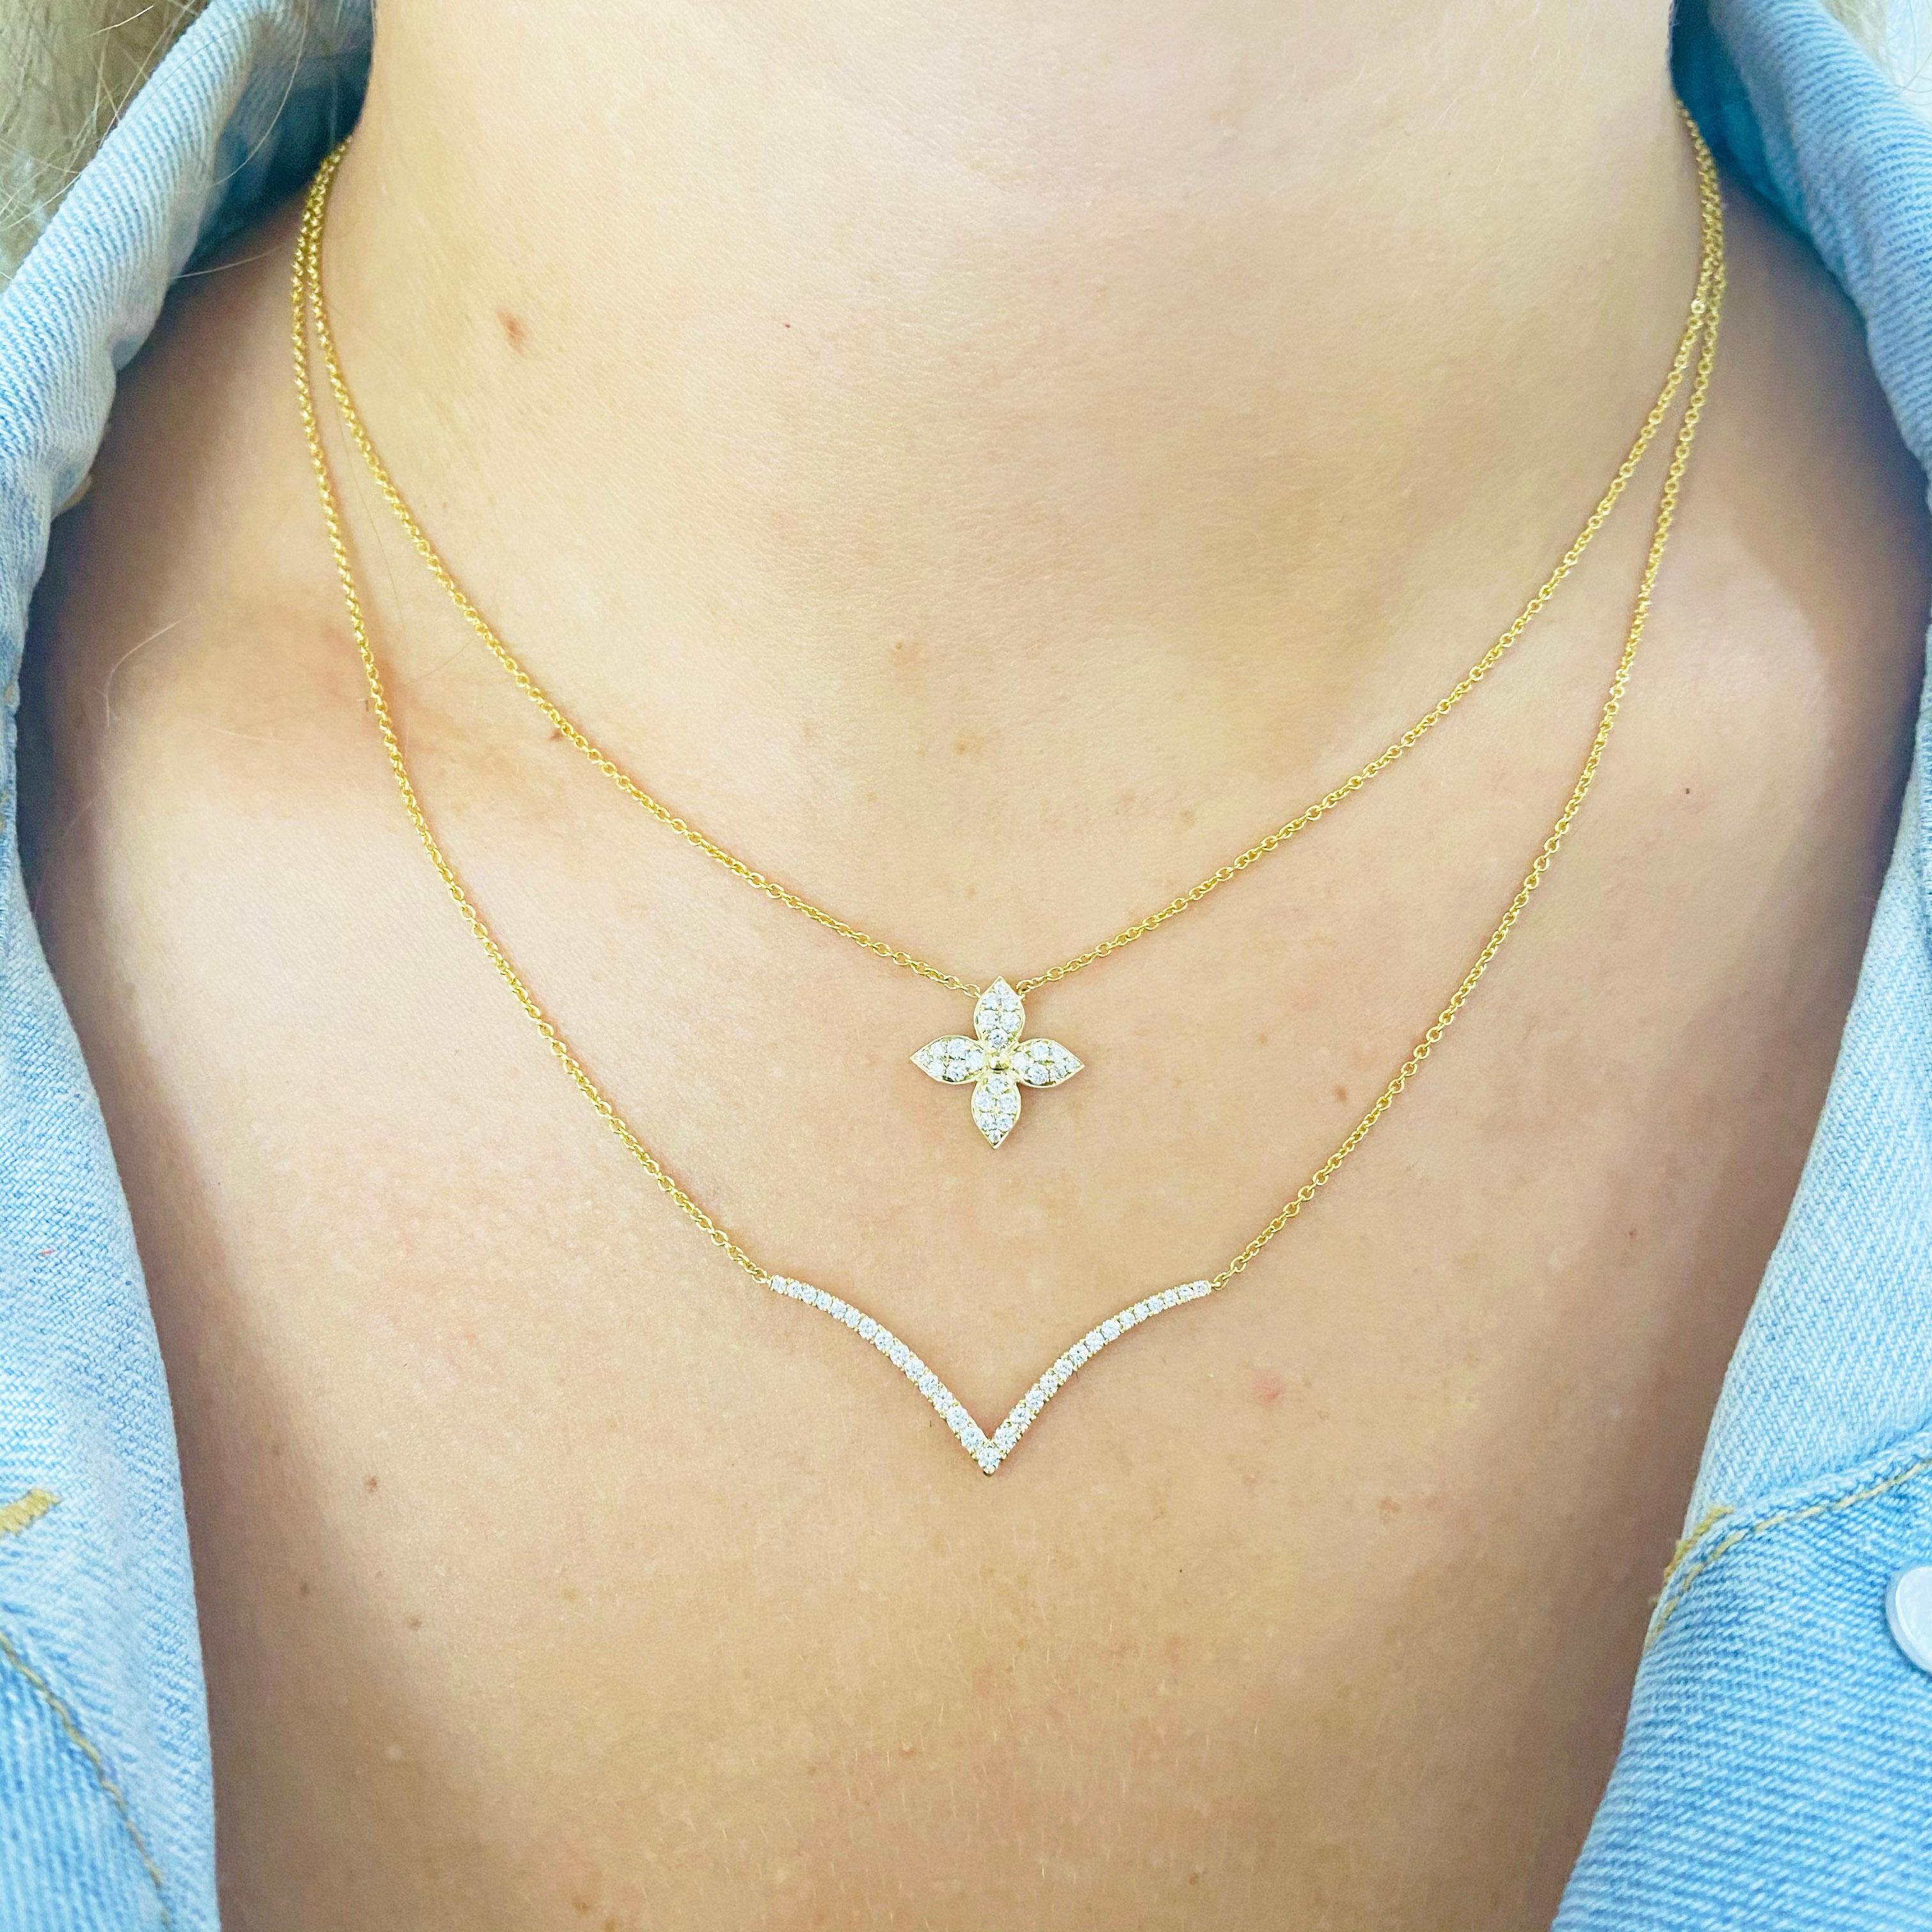 This gorgeous 14k yellow gold flower pendant dripping with diamonds is sure to put a smile on anyone's face! This necklace looks beautiful worn by itself and also looks wonderful in a necklace stack. This necklace would make a wonderful gift for